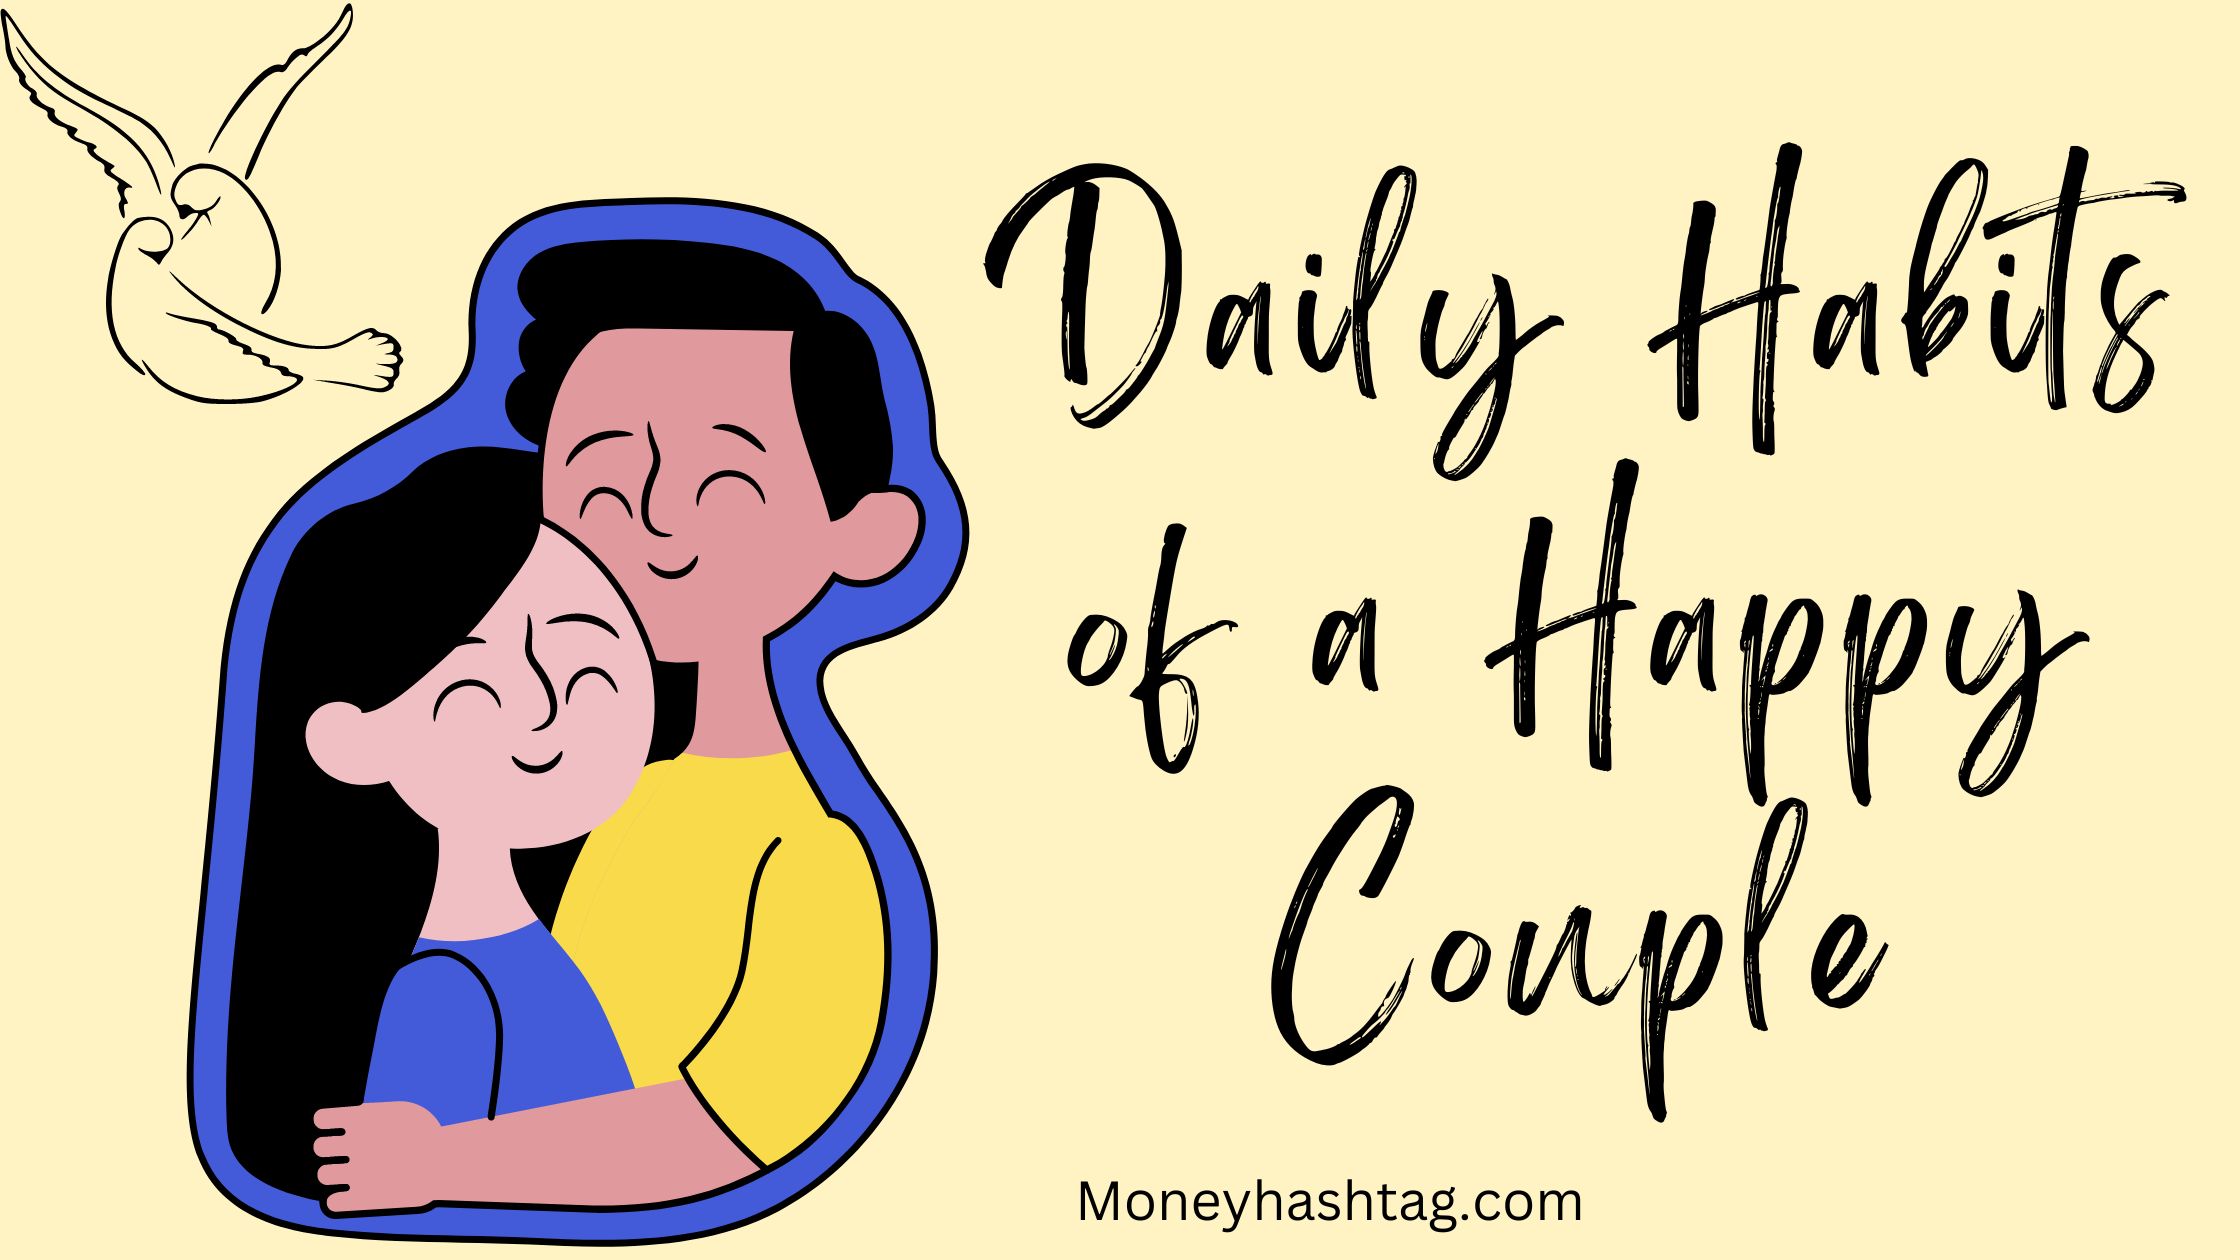 21 Daily Habits of a Happy Couple: How to be happier every day 1